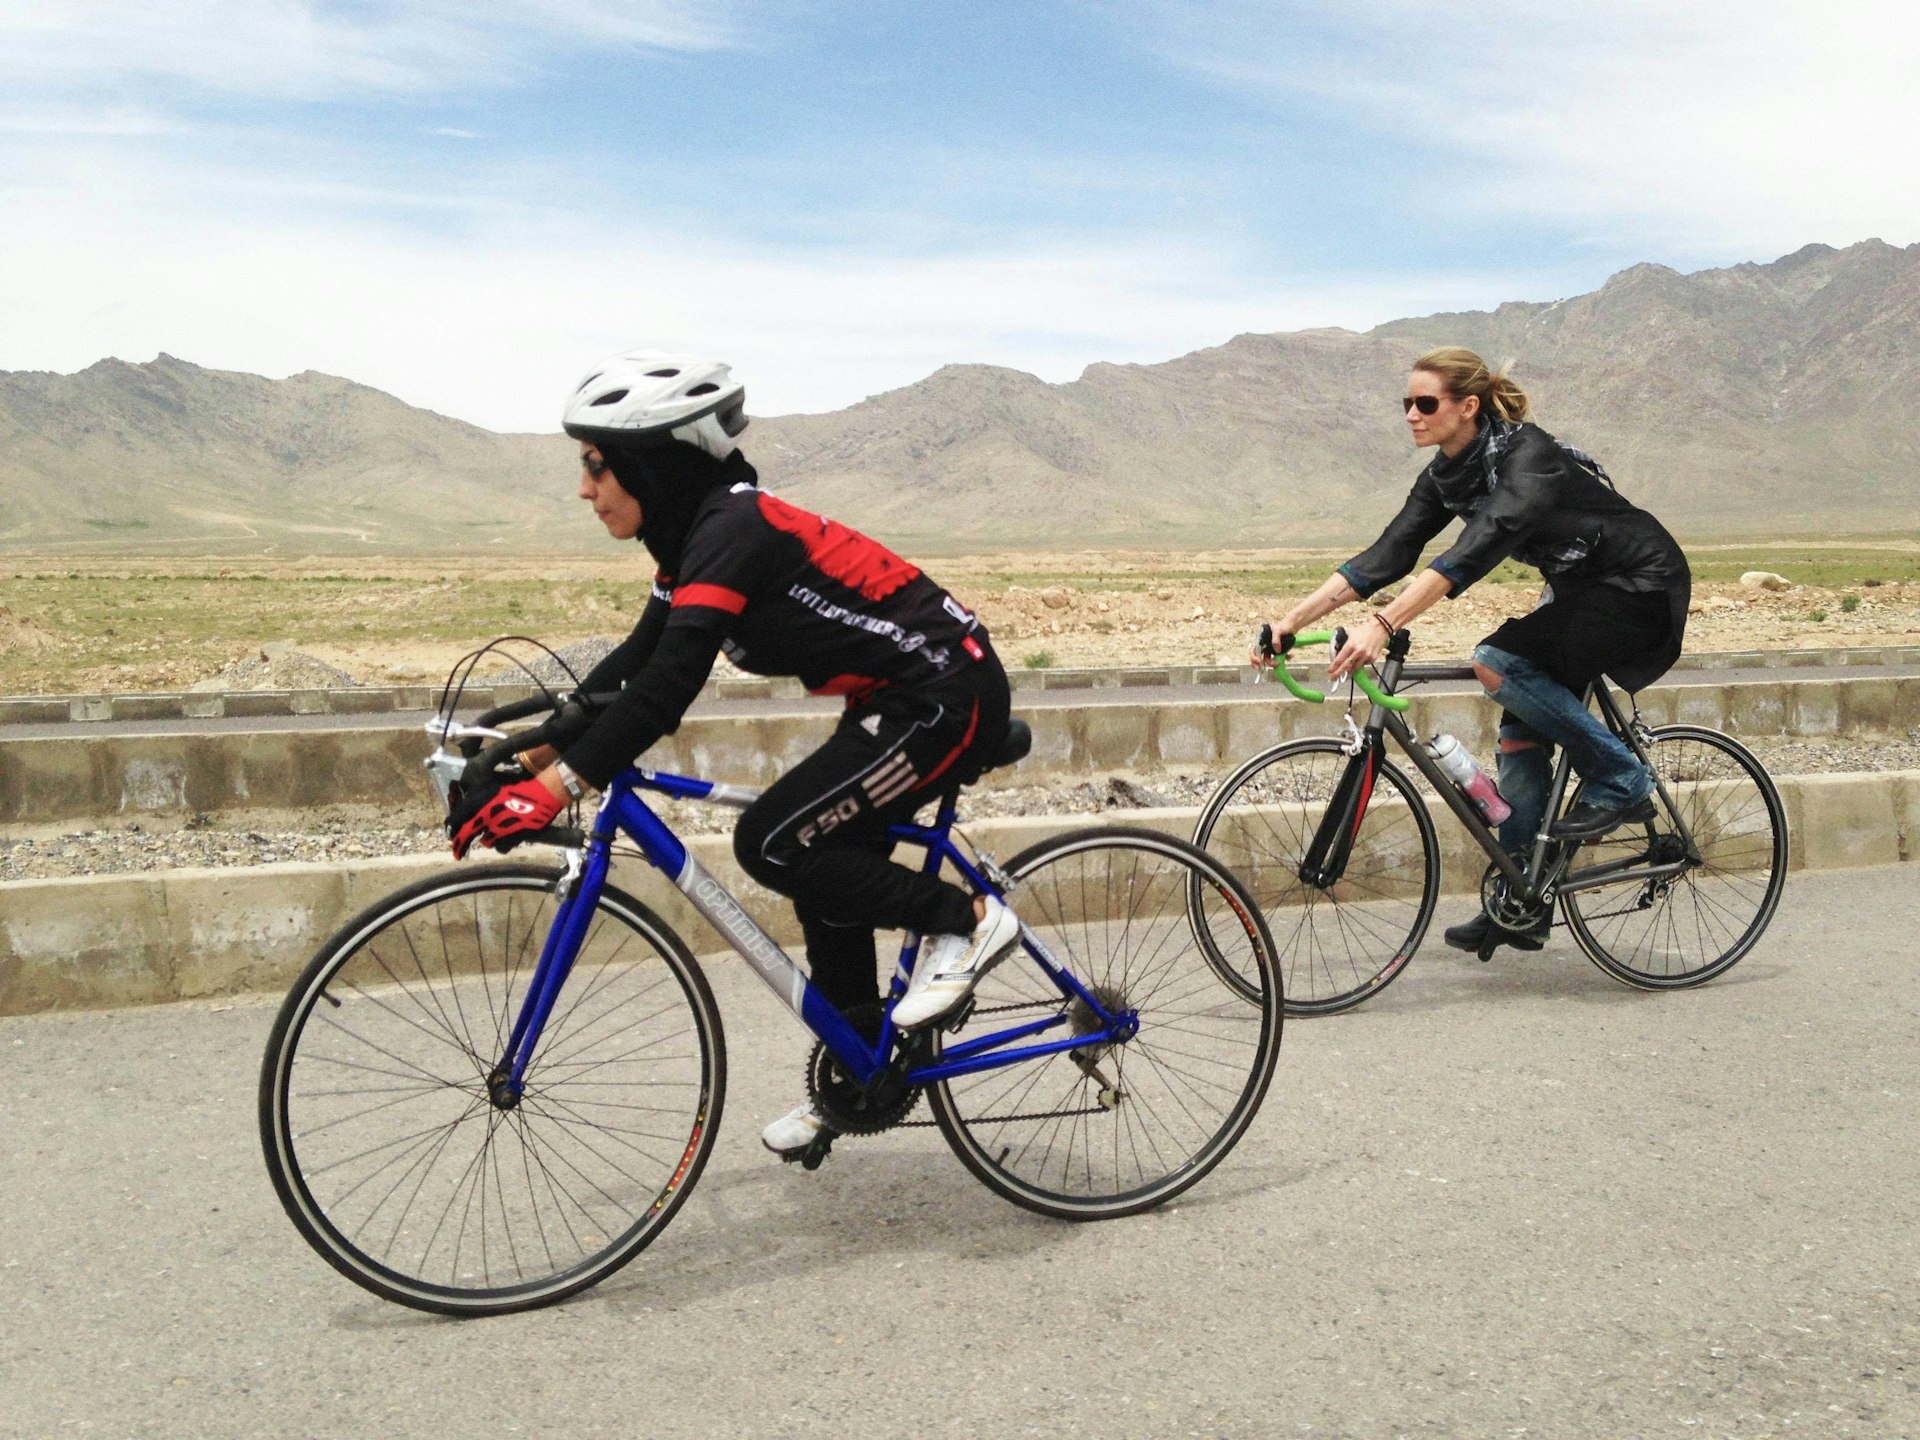 The women riding to freedom in Afghanistan